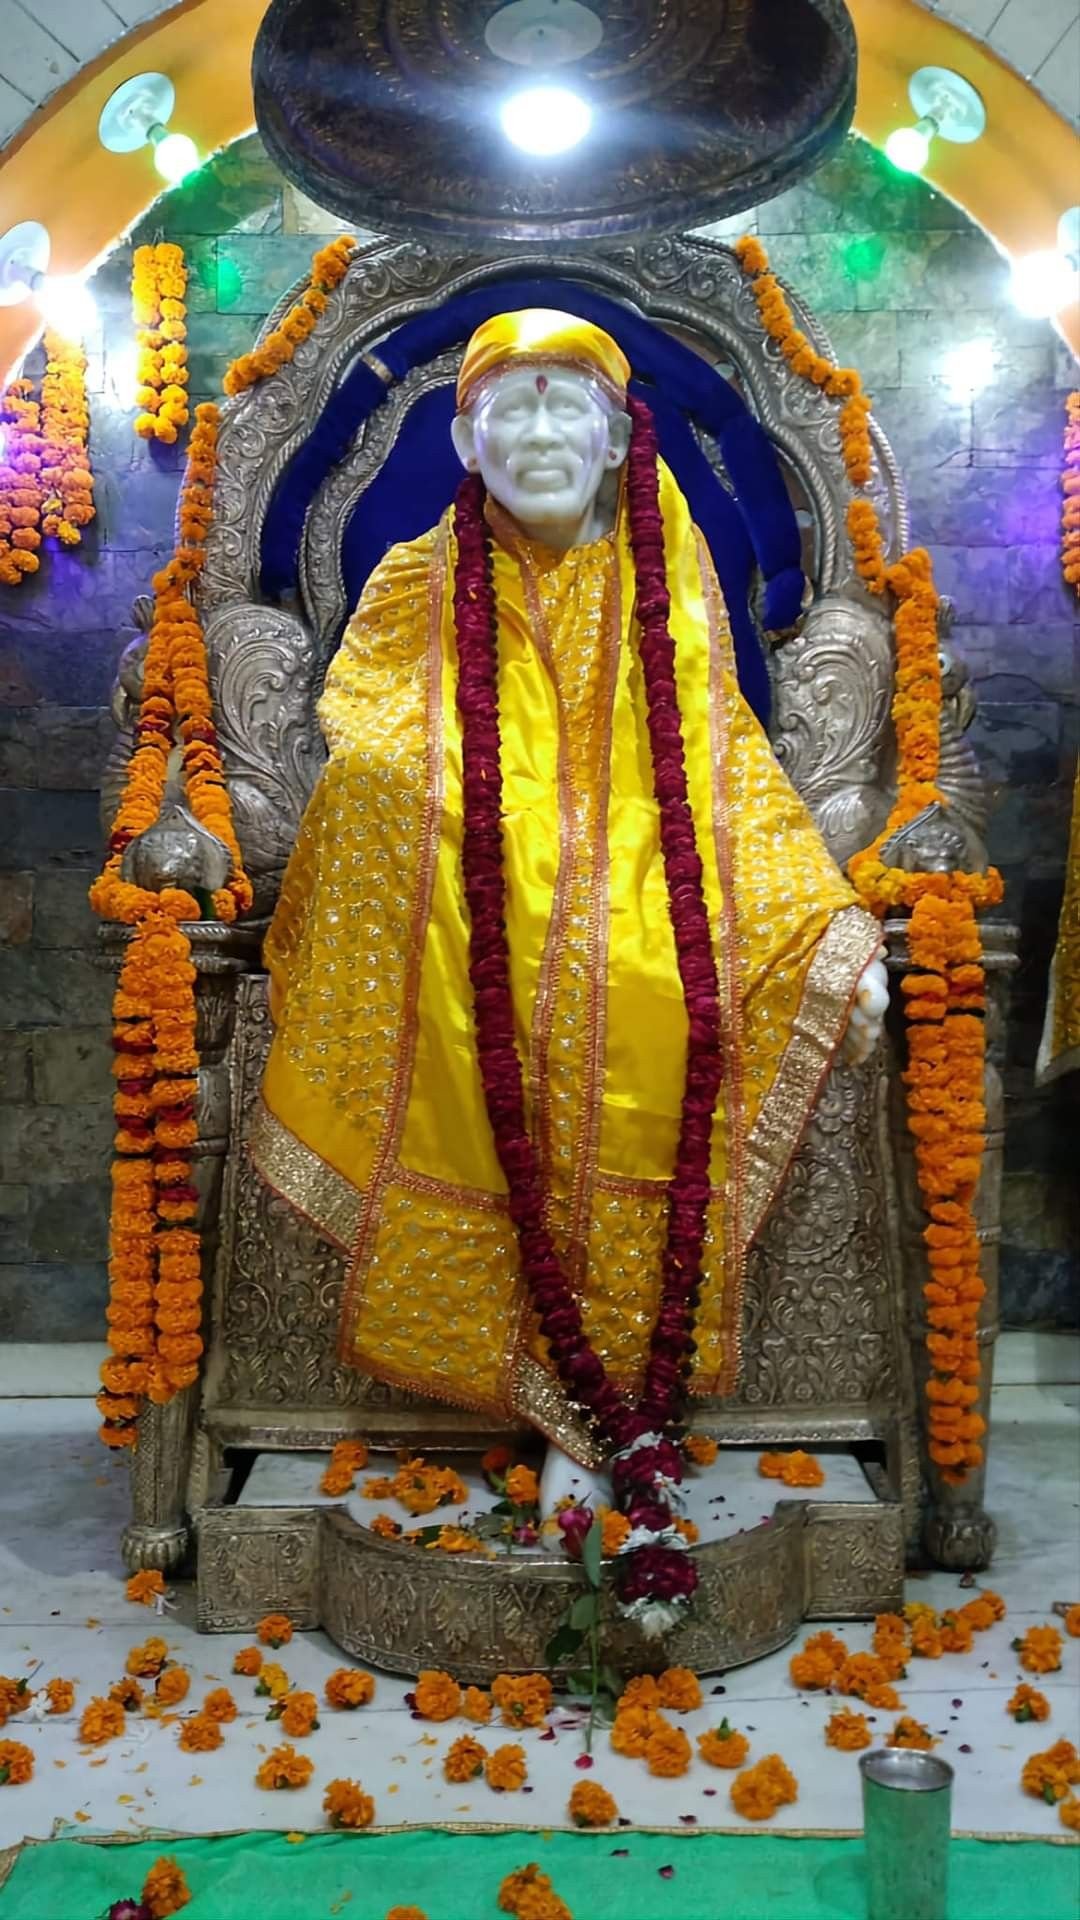 Download The Images Of Sai Baba